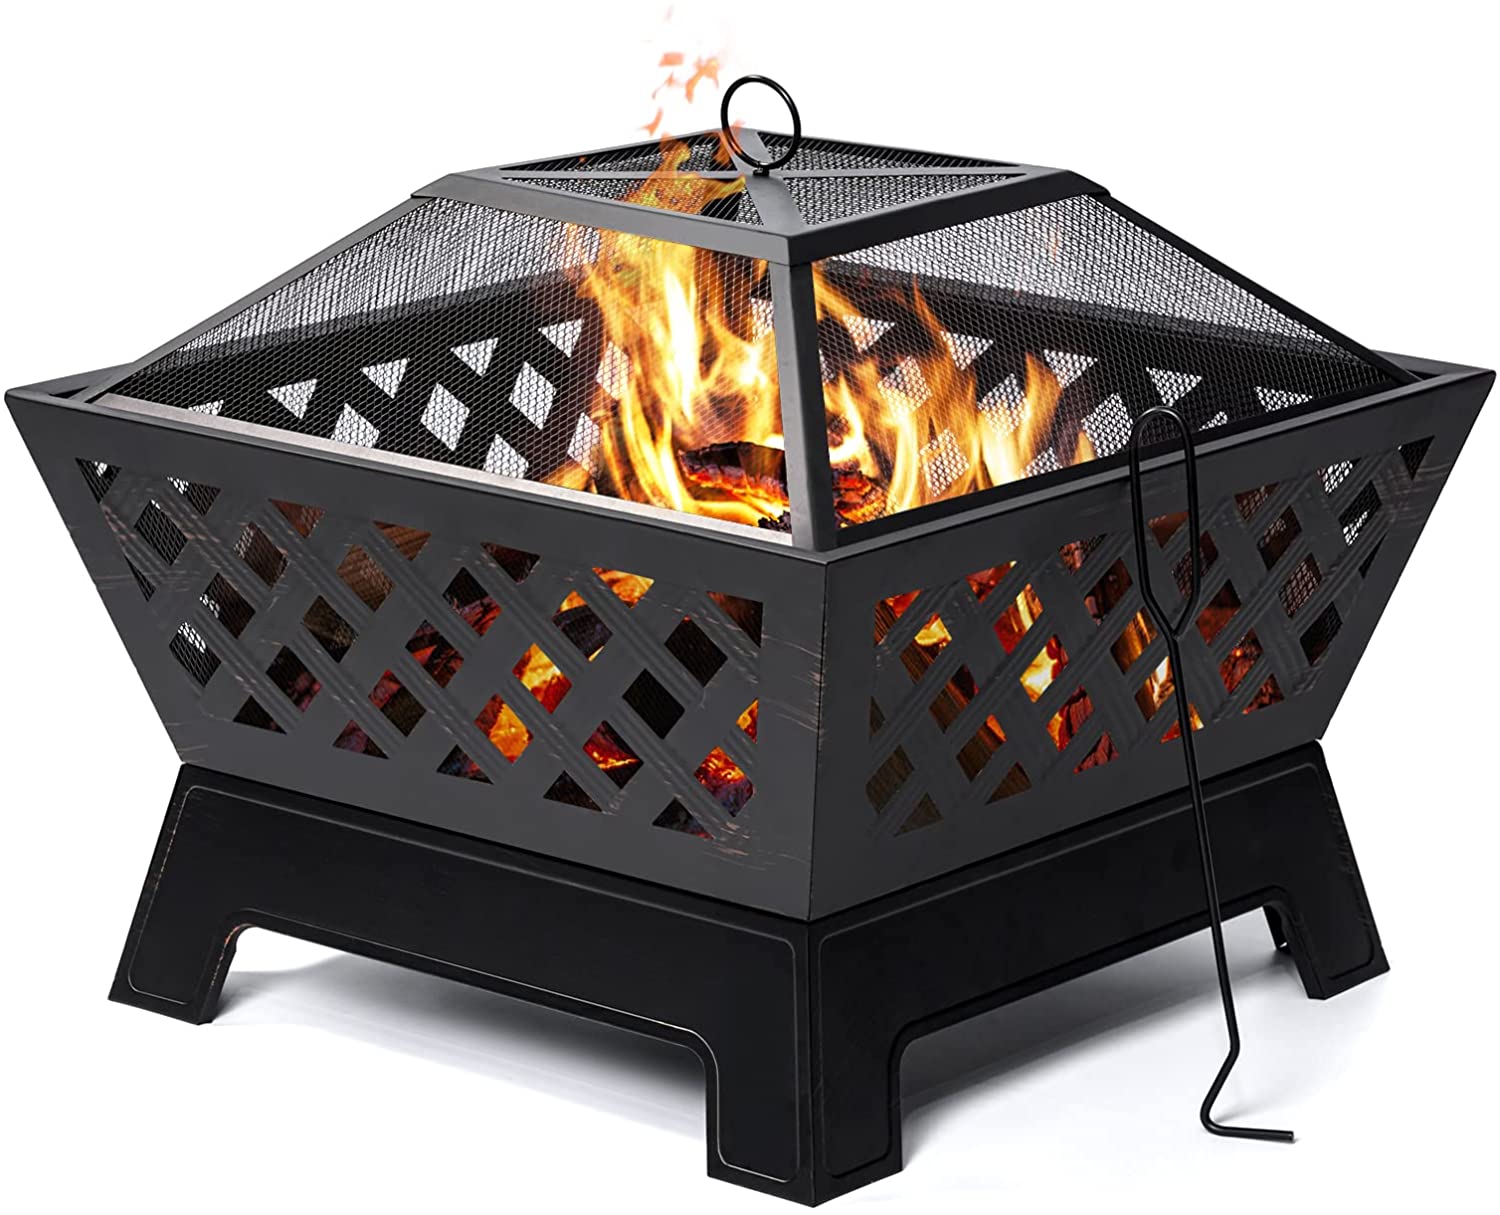 Kingso-26--Inch-Fire-Pits-Large-Wood-Burning-Square-Firepit-with-Ash-Plate-Spark-Screen-Log-Grate-Po-1920540-5